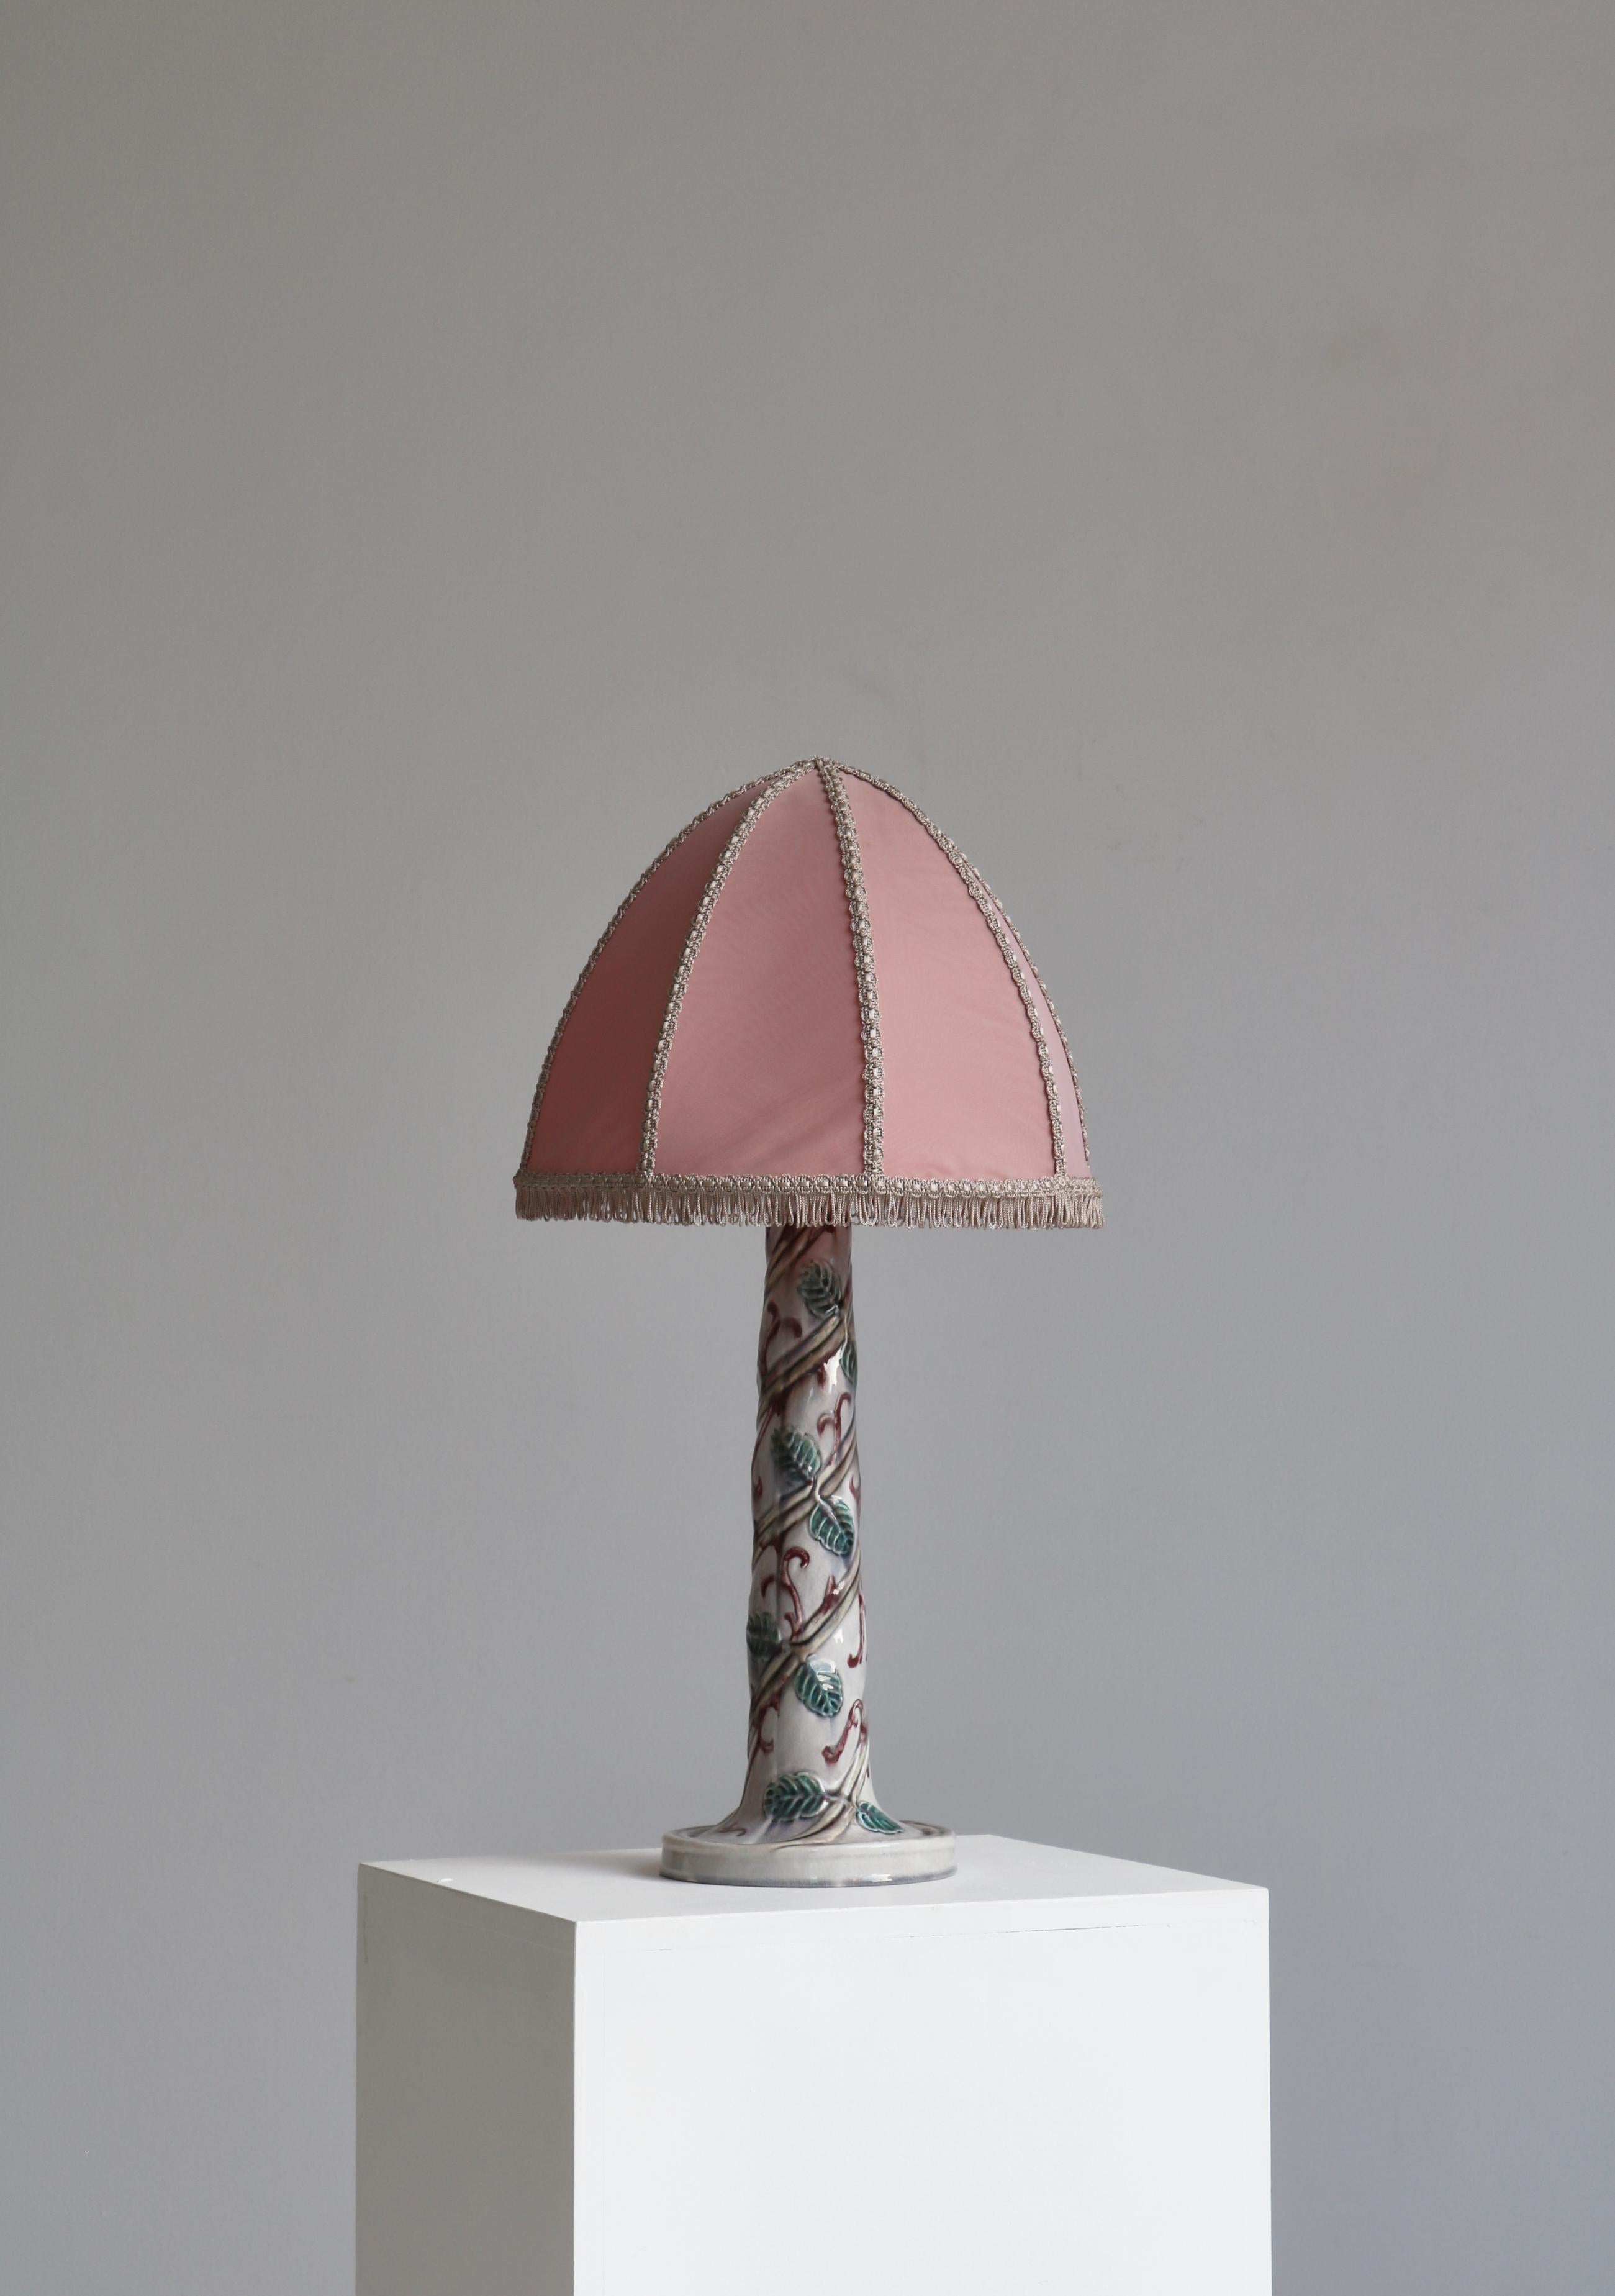 Swedish Grace Pink Porcelain Table Lamp w. Foliage Decor, Louise Adelborg, 1920s In Good Condition For Sale In Odense, DK